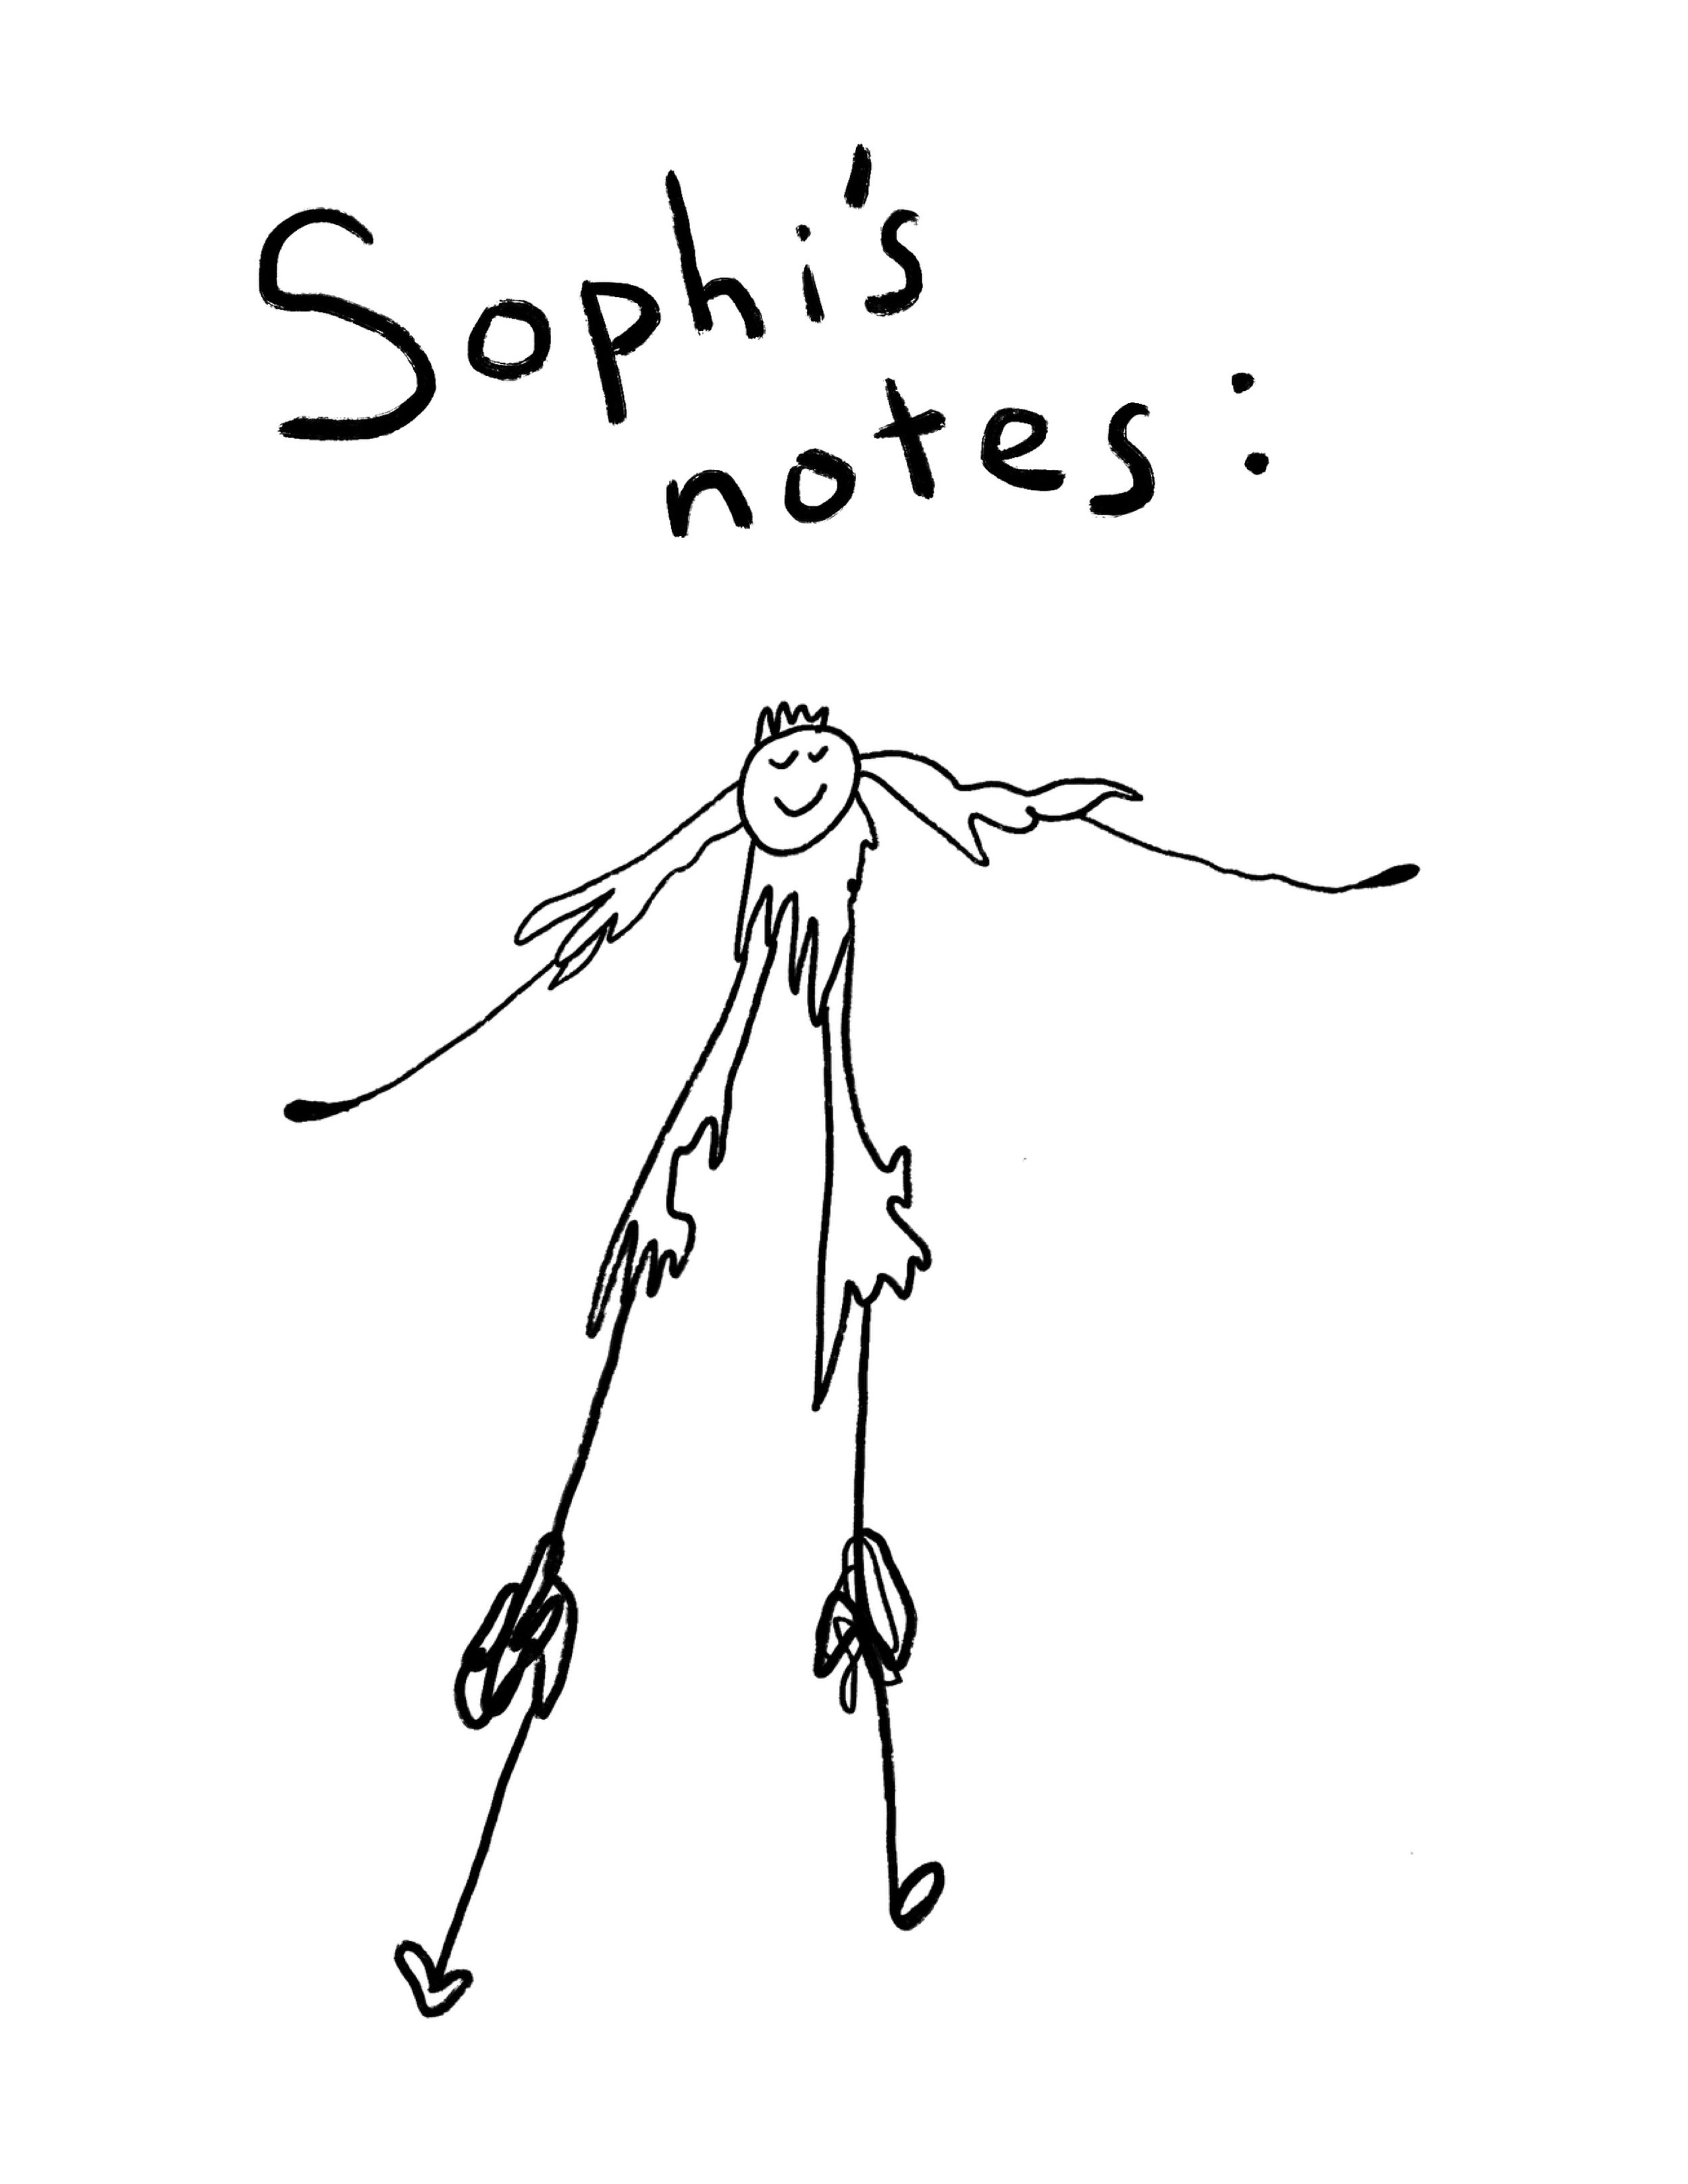 Sophi's Notes